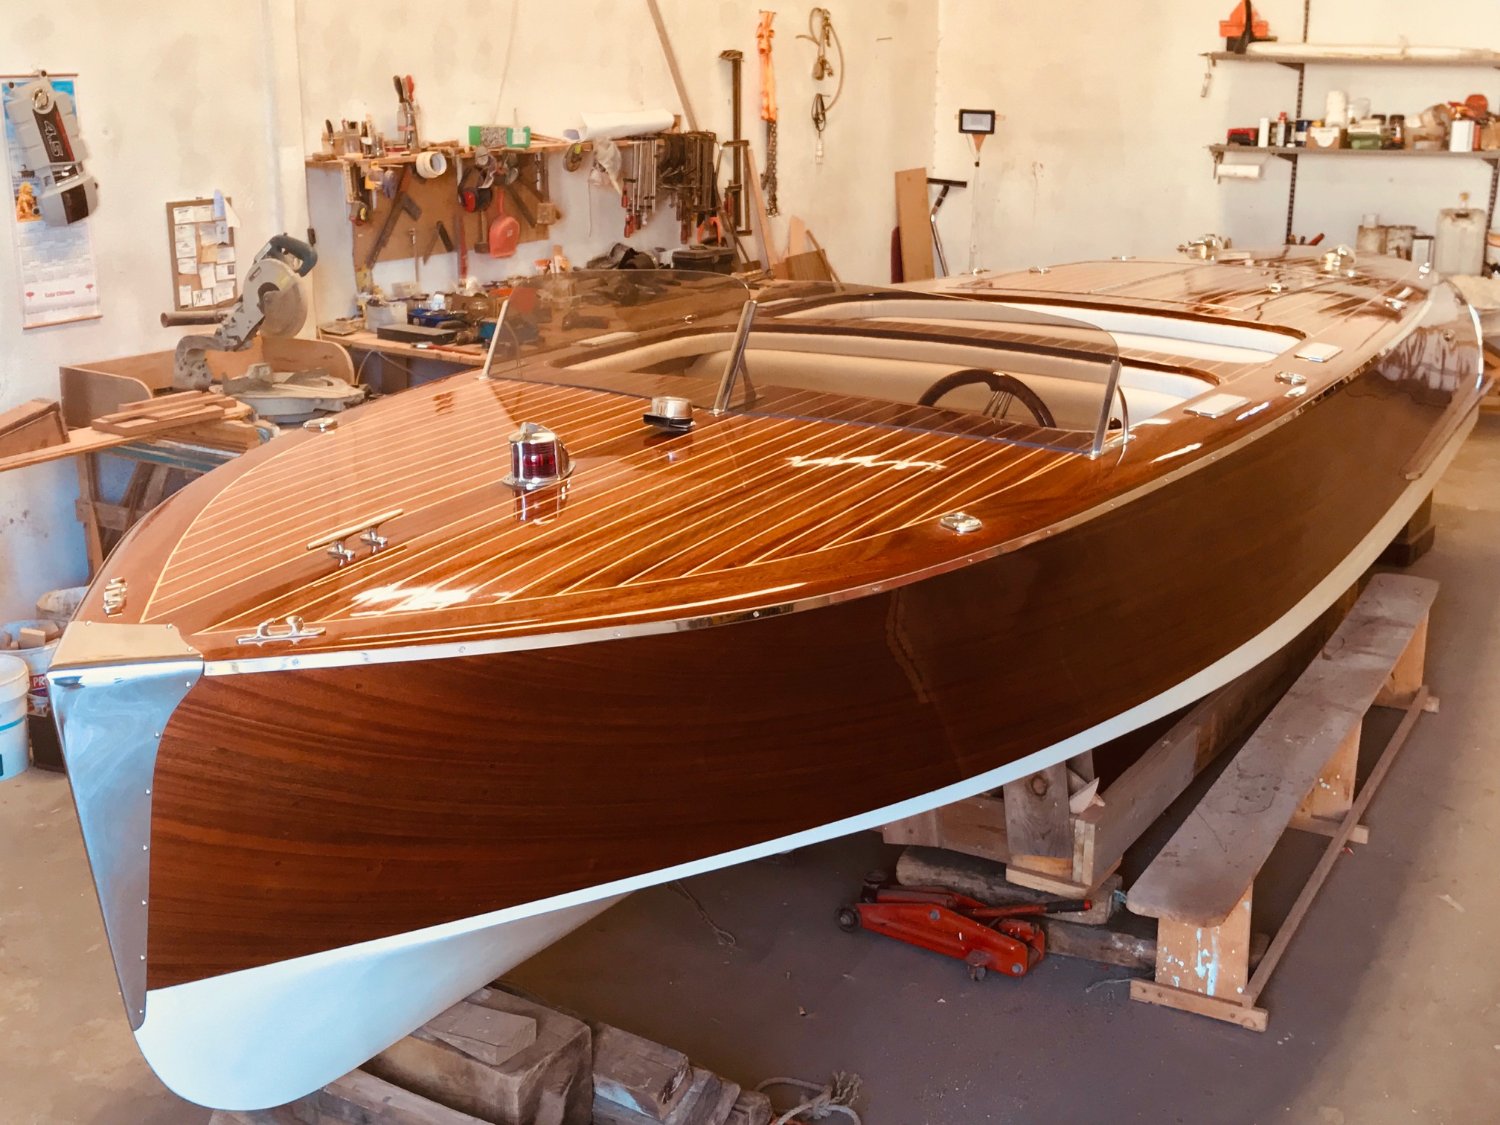 How to build a chris craft wooden boat